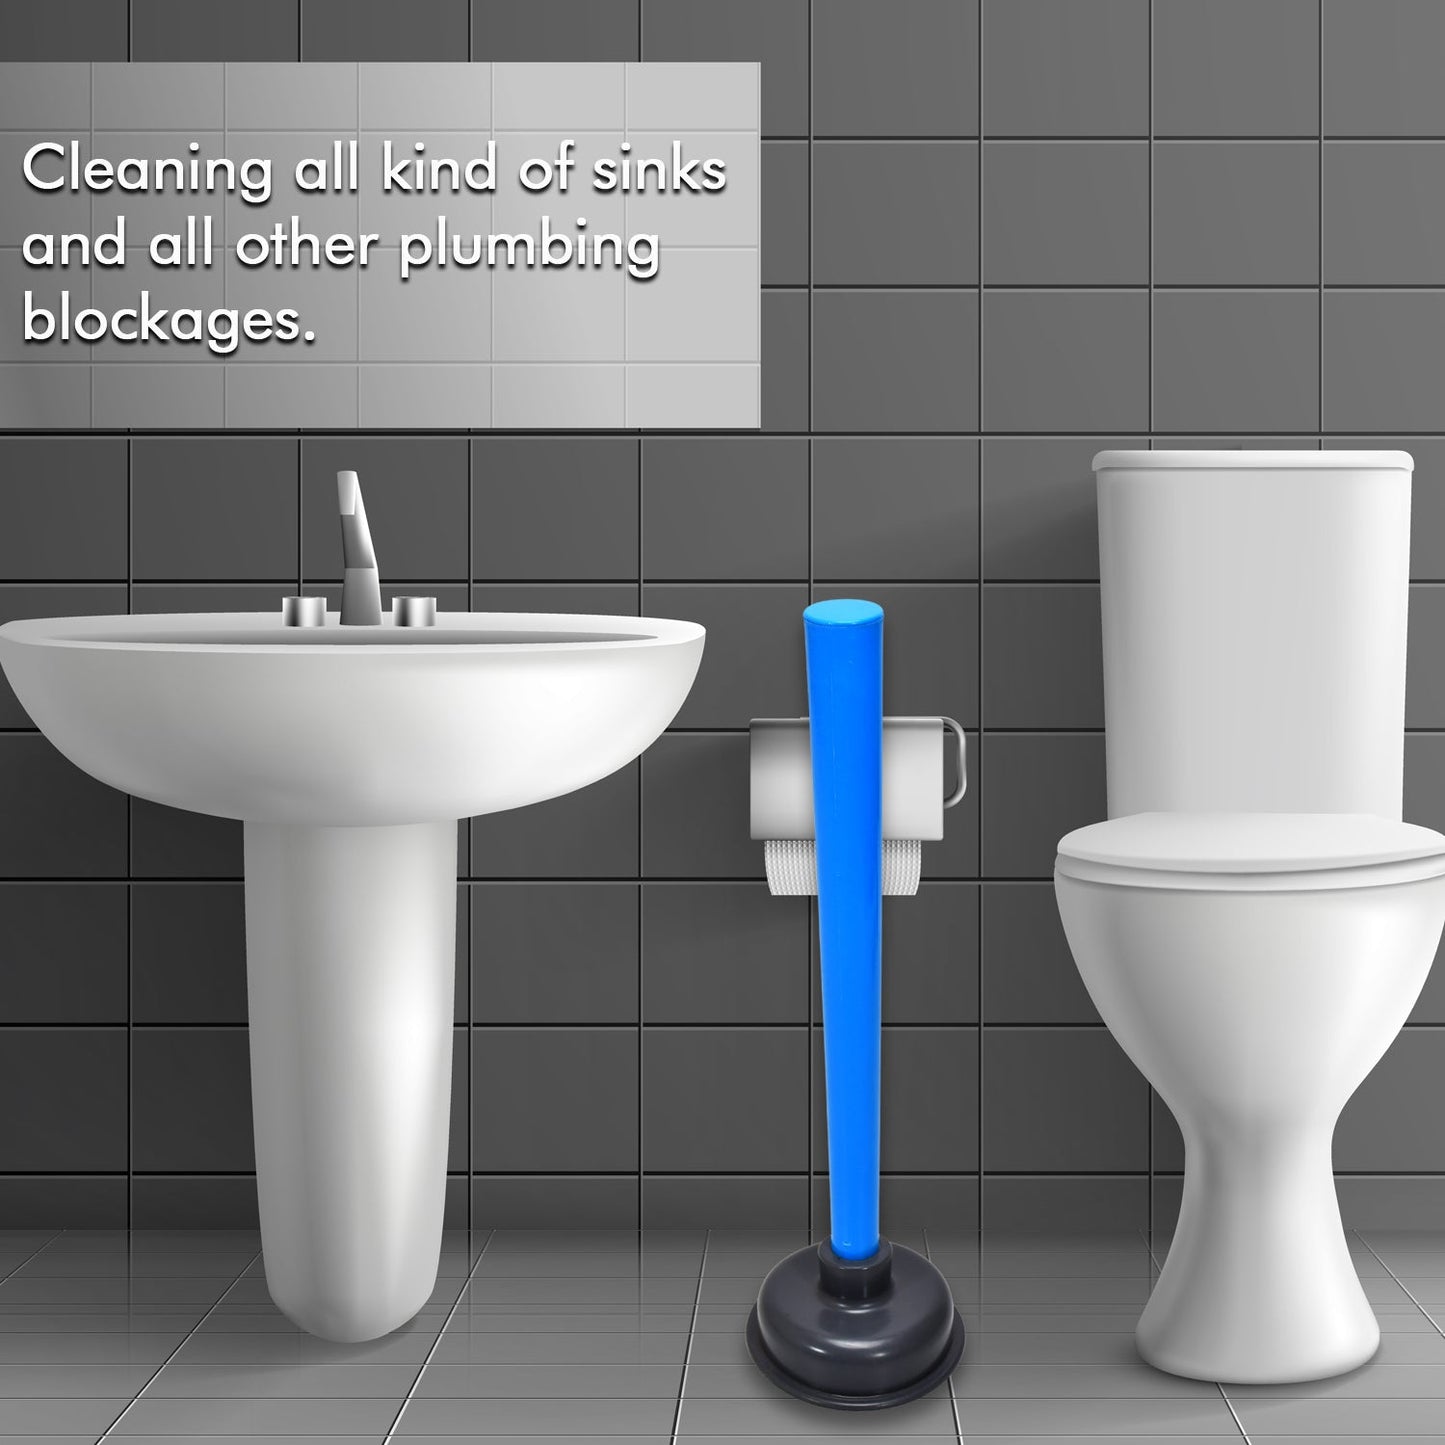 4025 Multifunctional Toilet Plunger, Toilet Blockage Remover Suction Device Dukandaily